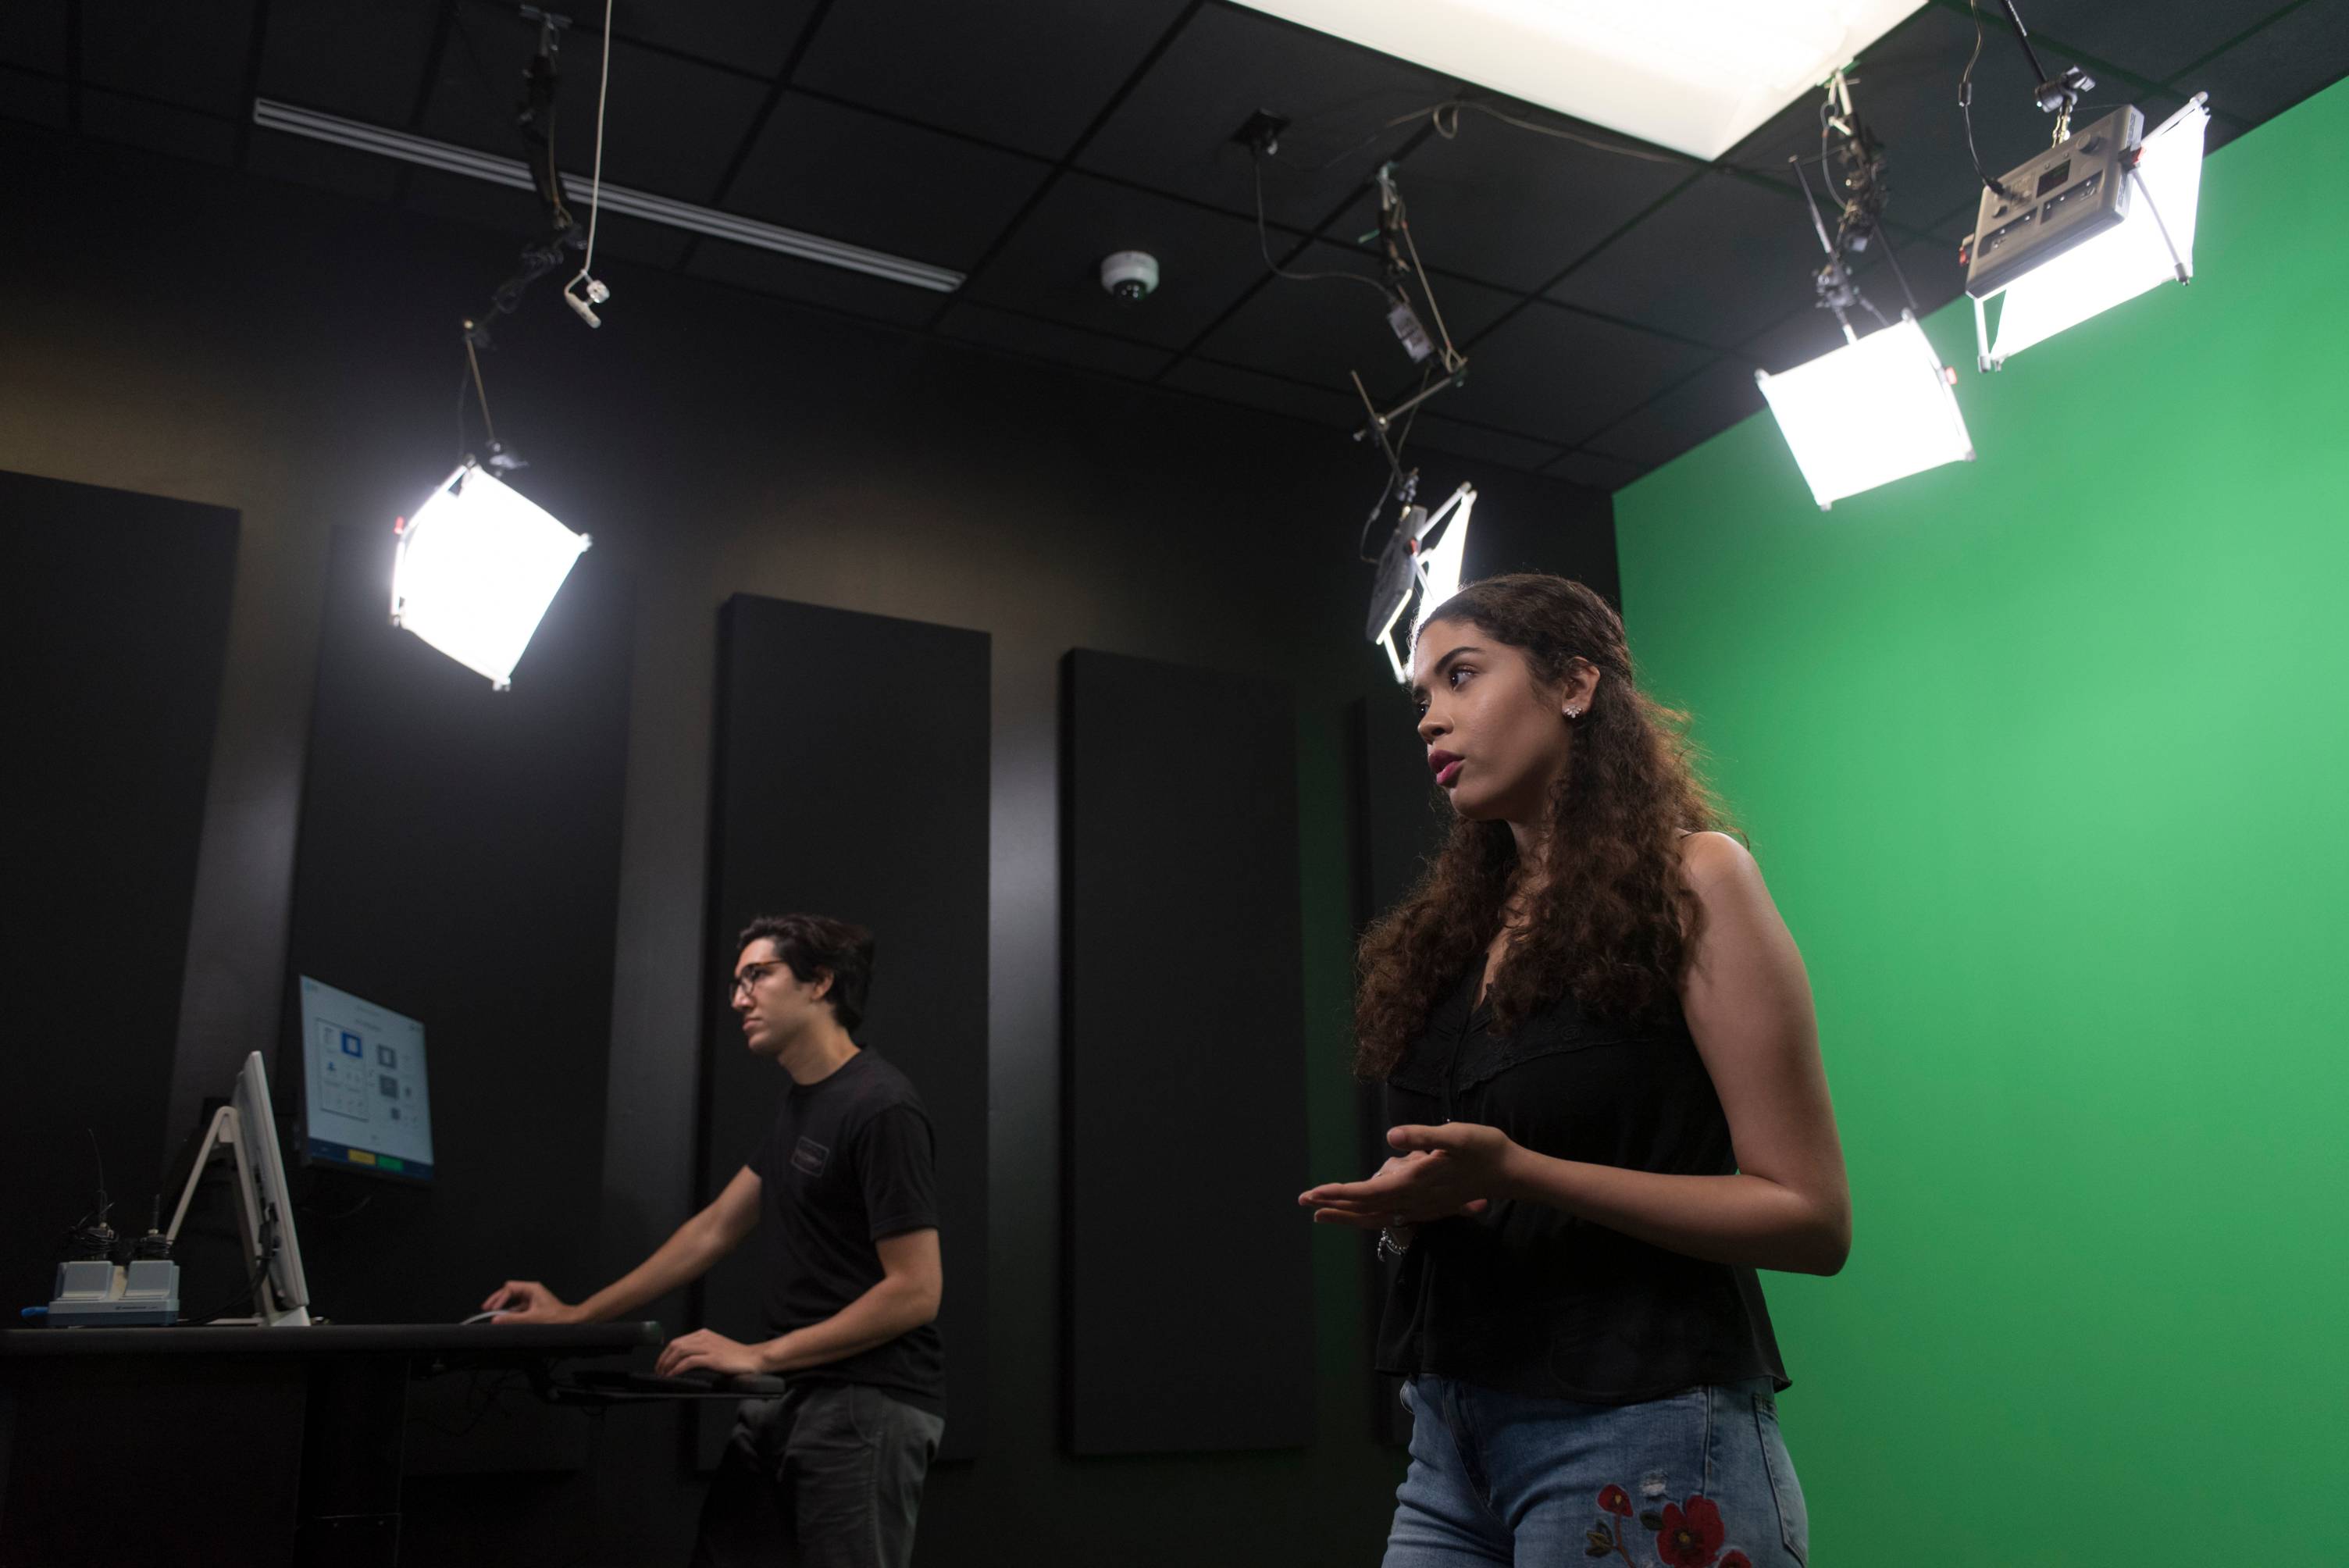 Woman in studio lighting and green screen background and man operating computer